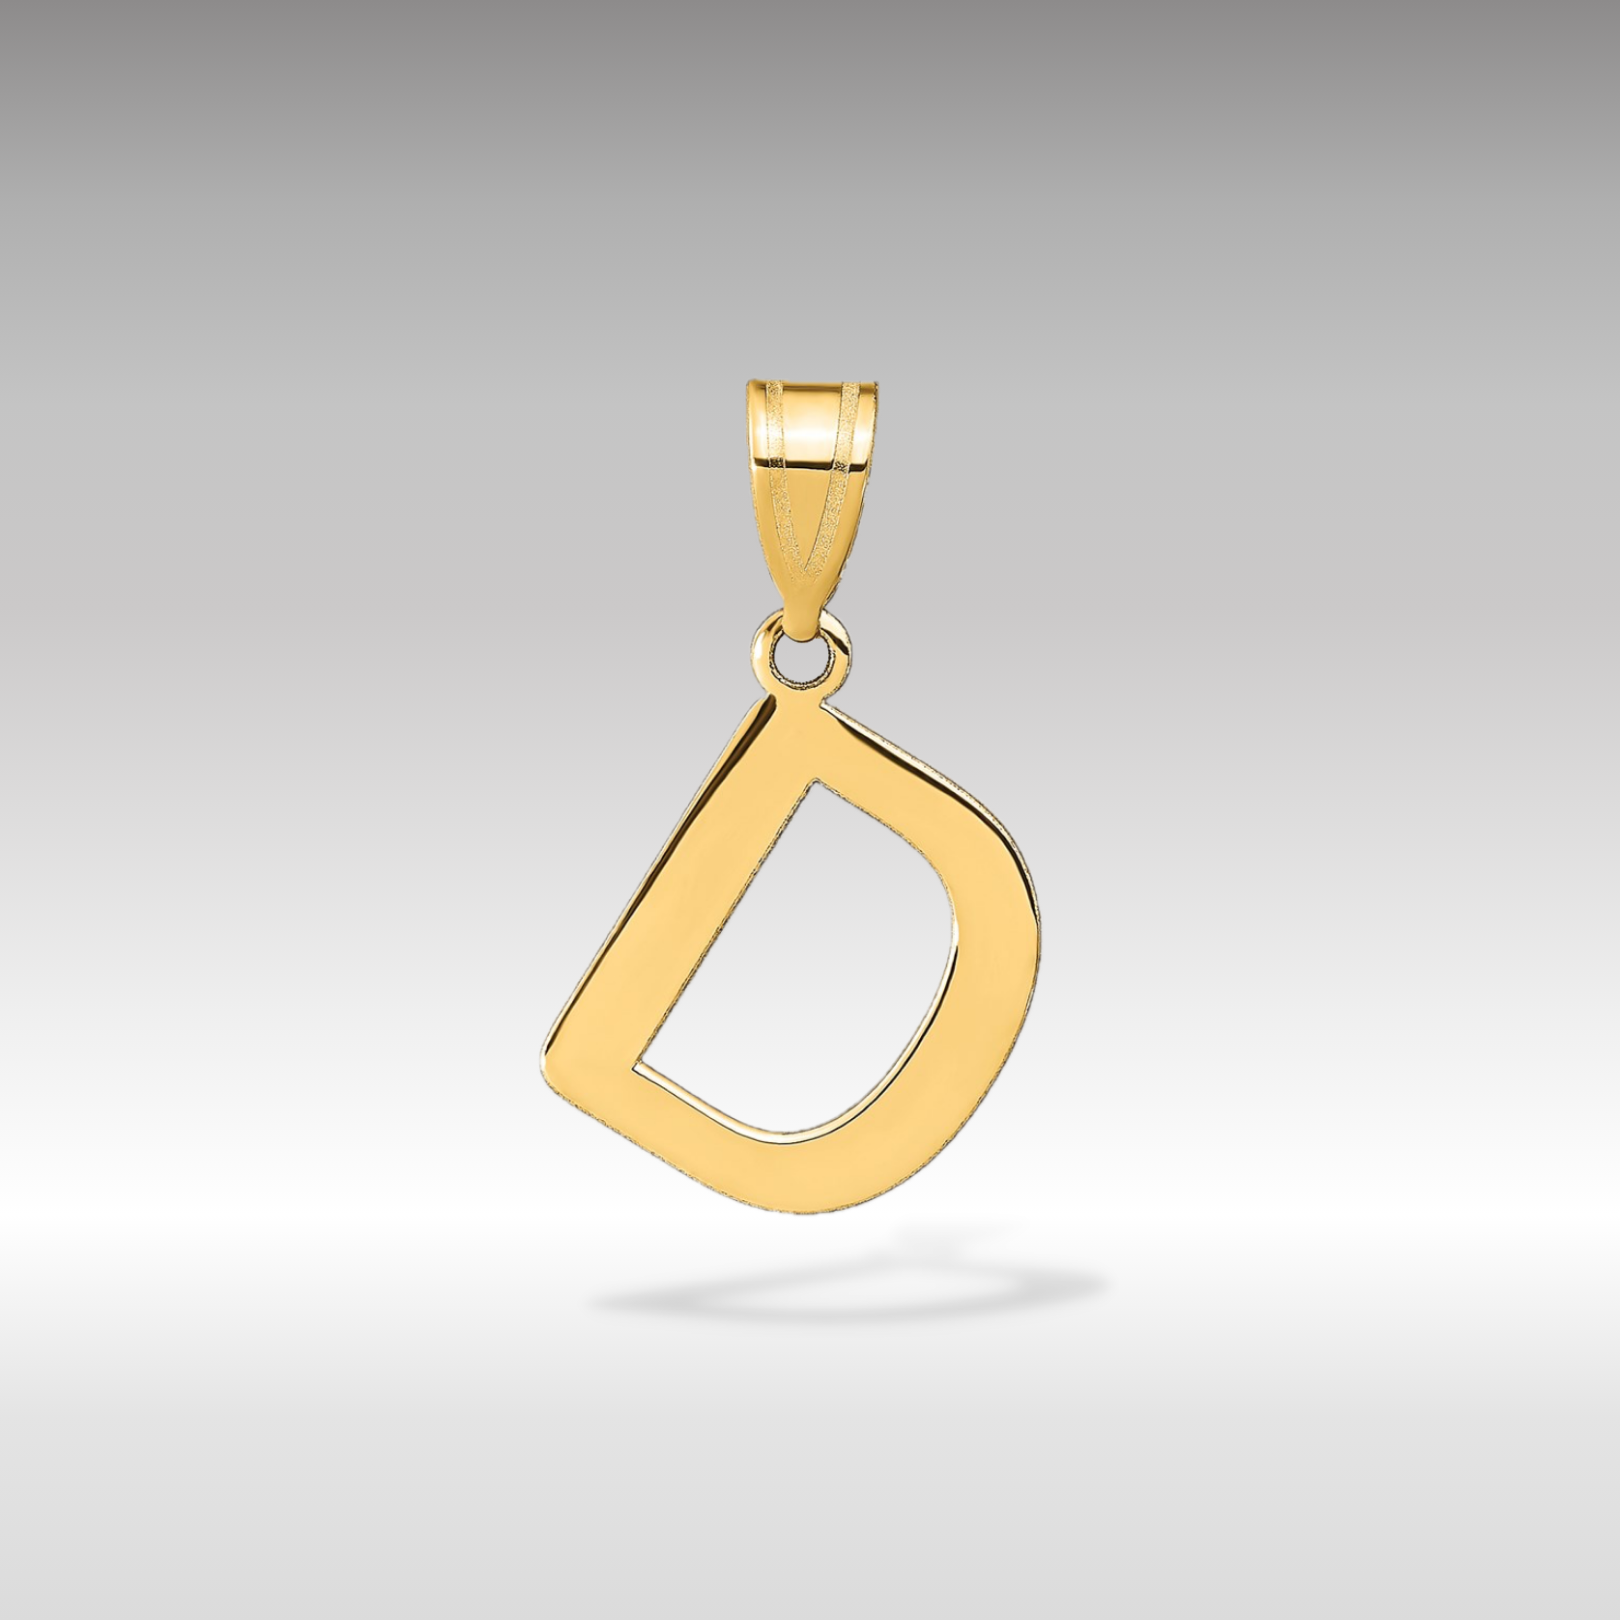 14k Gold Polished Letter 'D' Initial Charm - Charlie & Co. Jewelry